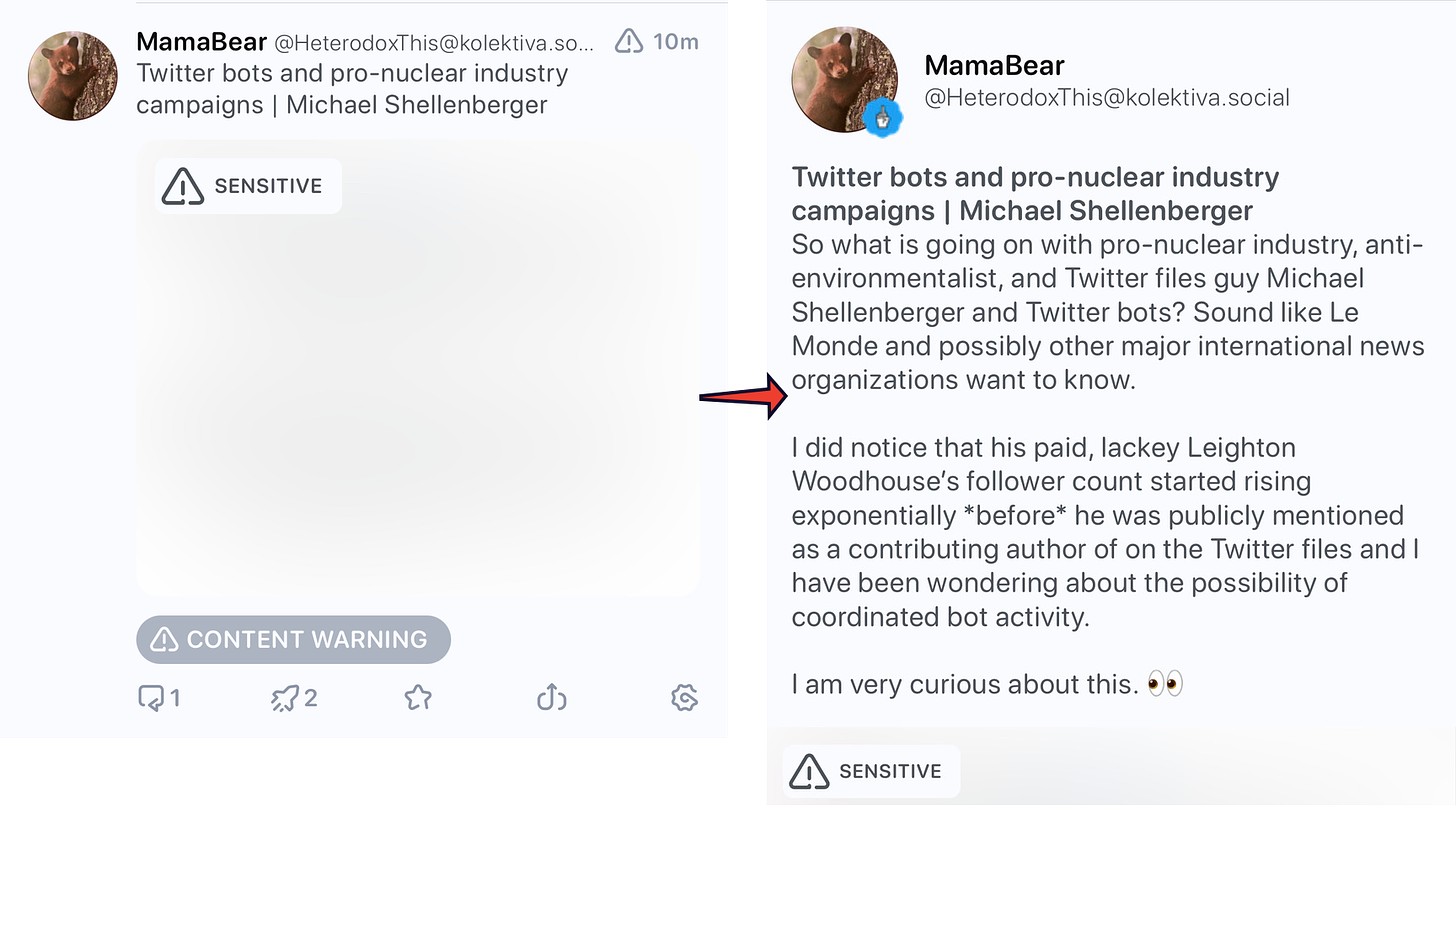 Mastodon post: "Twitter bots and pro-nuclear industry campaigns" with a "Sensitive" label, which then opens to a description accusing someone of being the beneficiary of "coordinated bot activity".